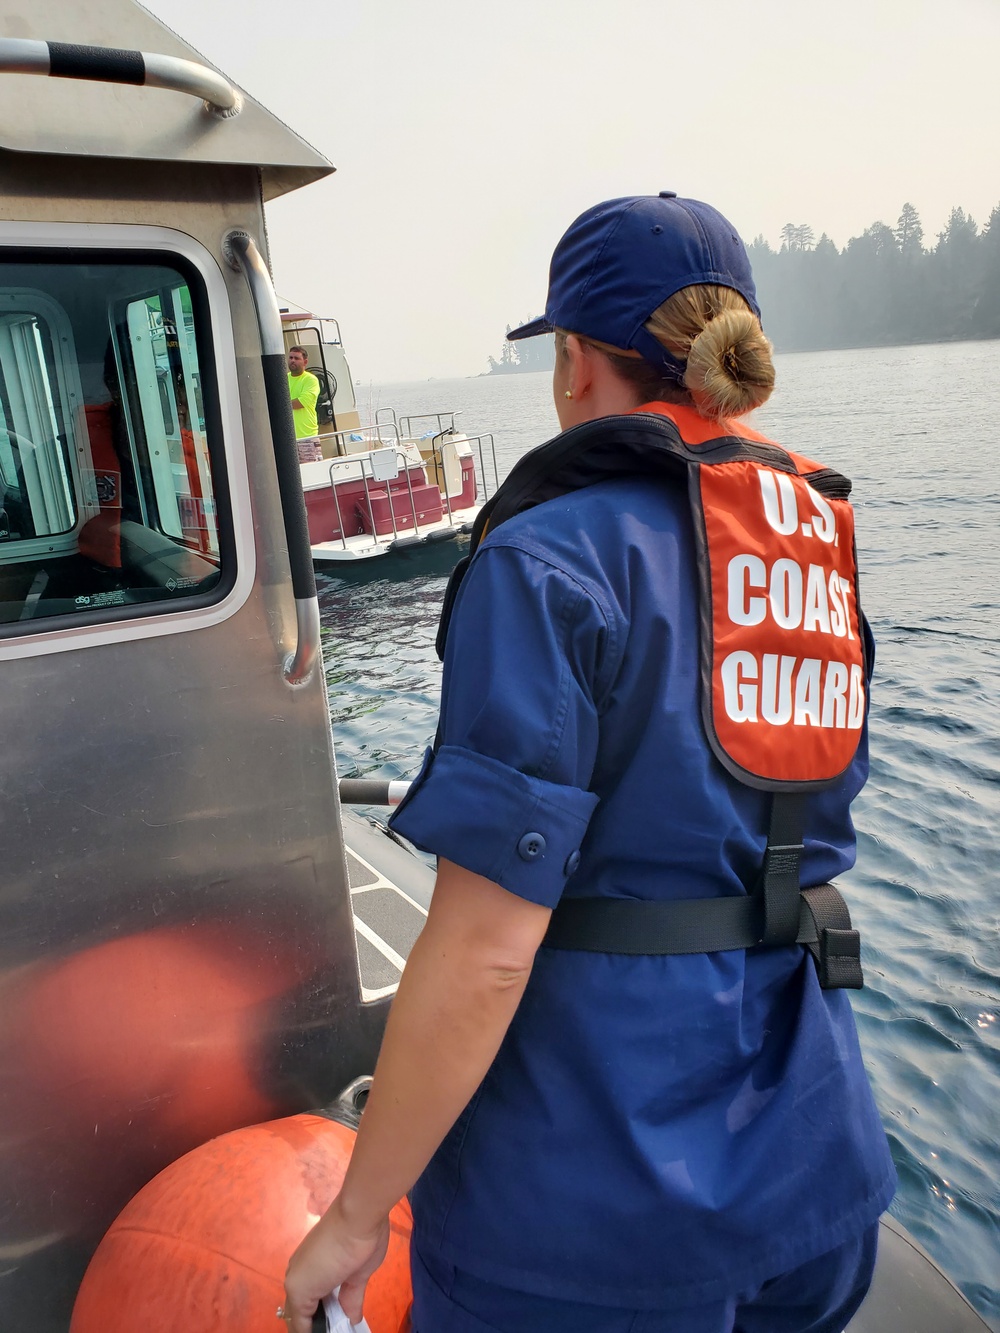 Coast Guard terminates 8 illegal charter voyages in Lake Tahoe